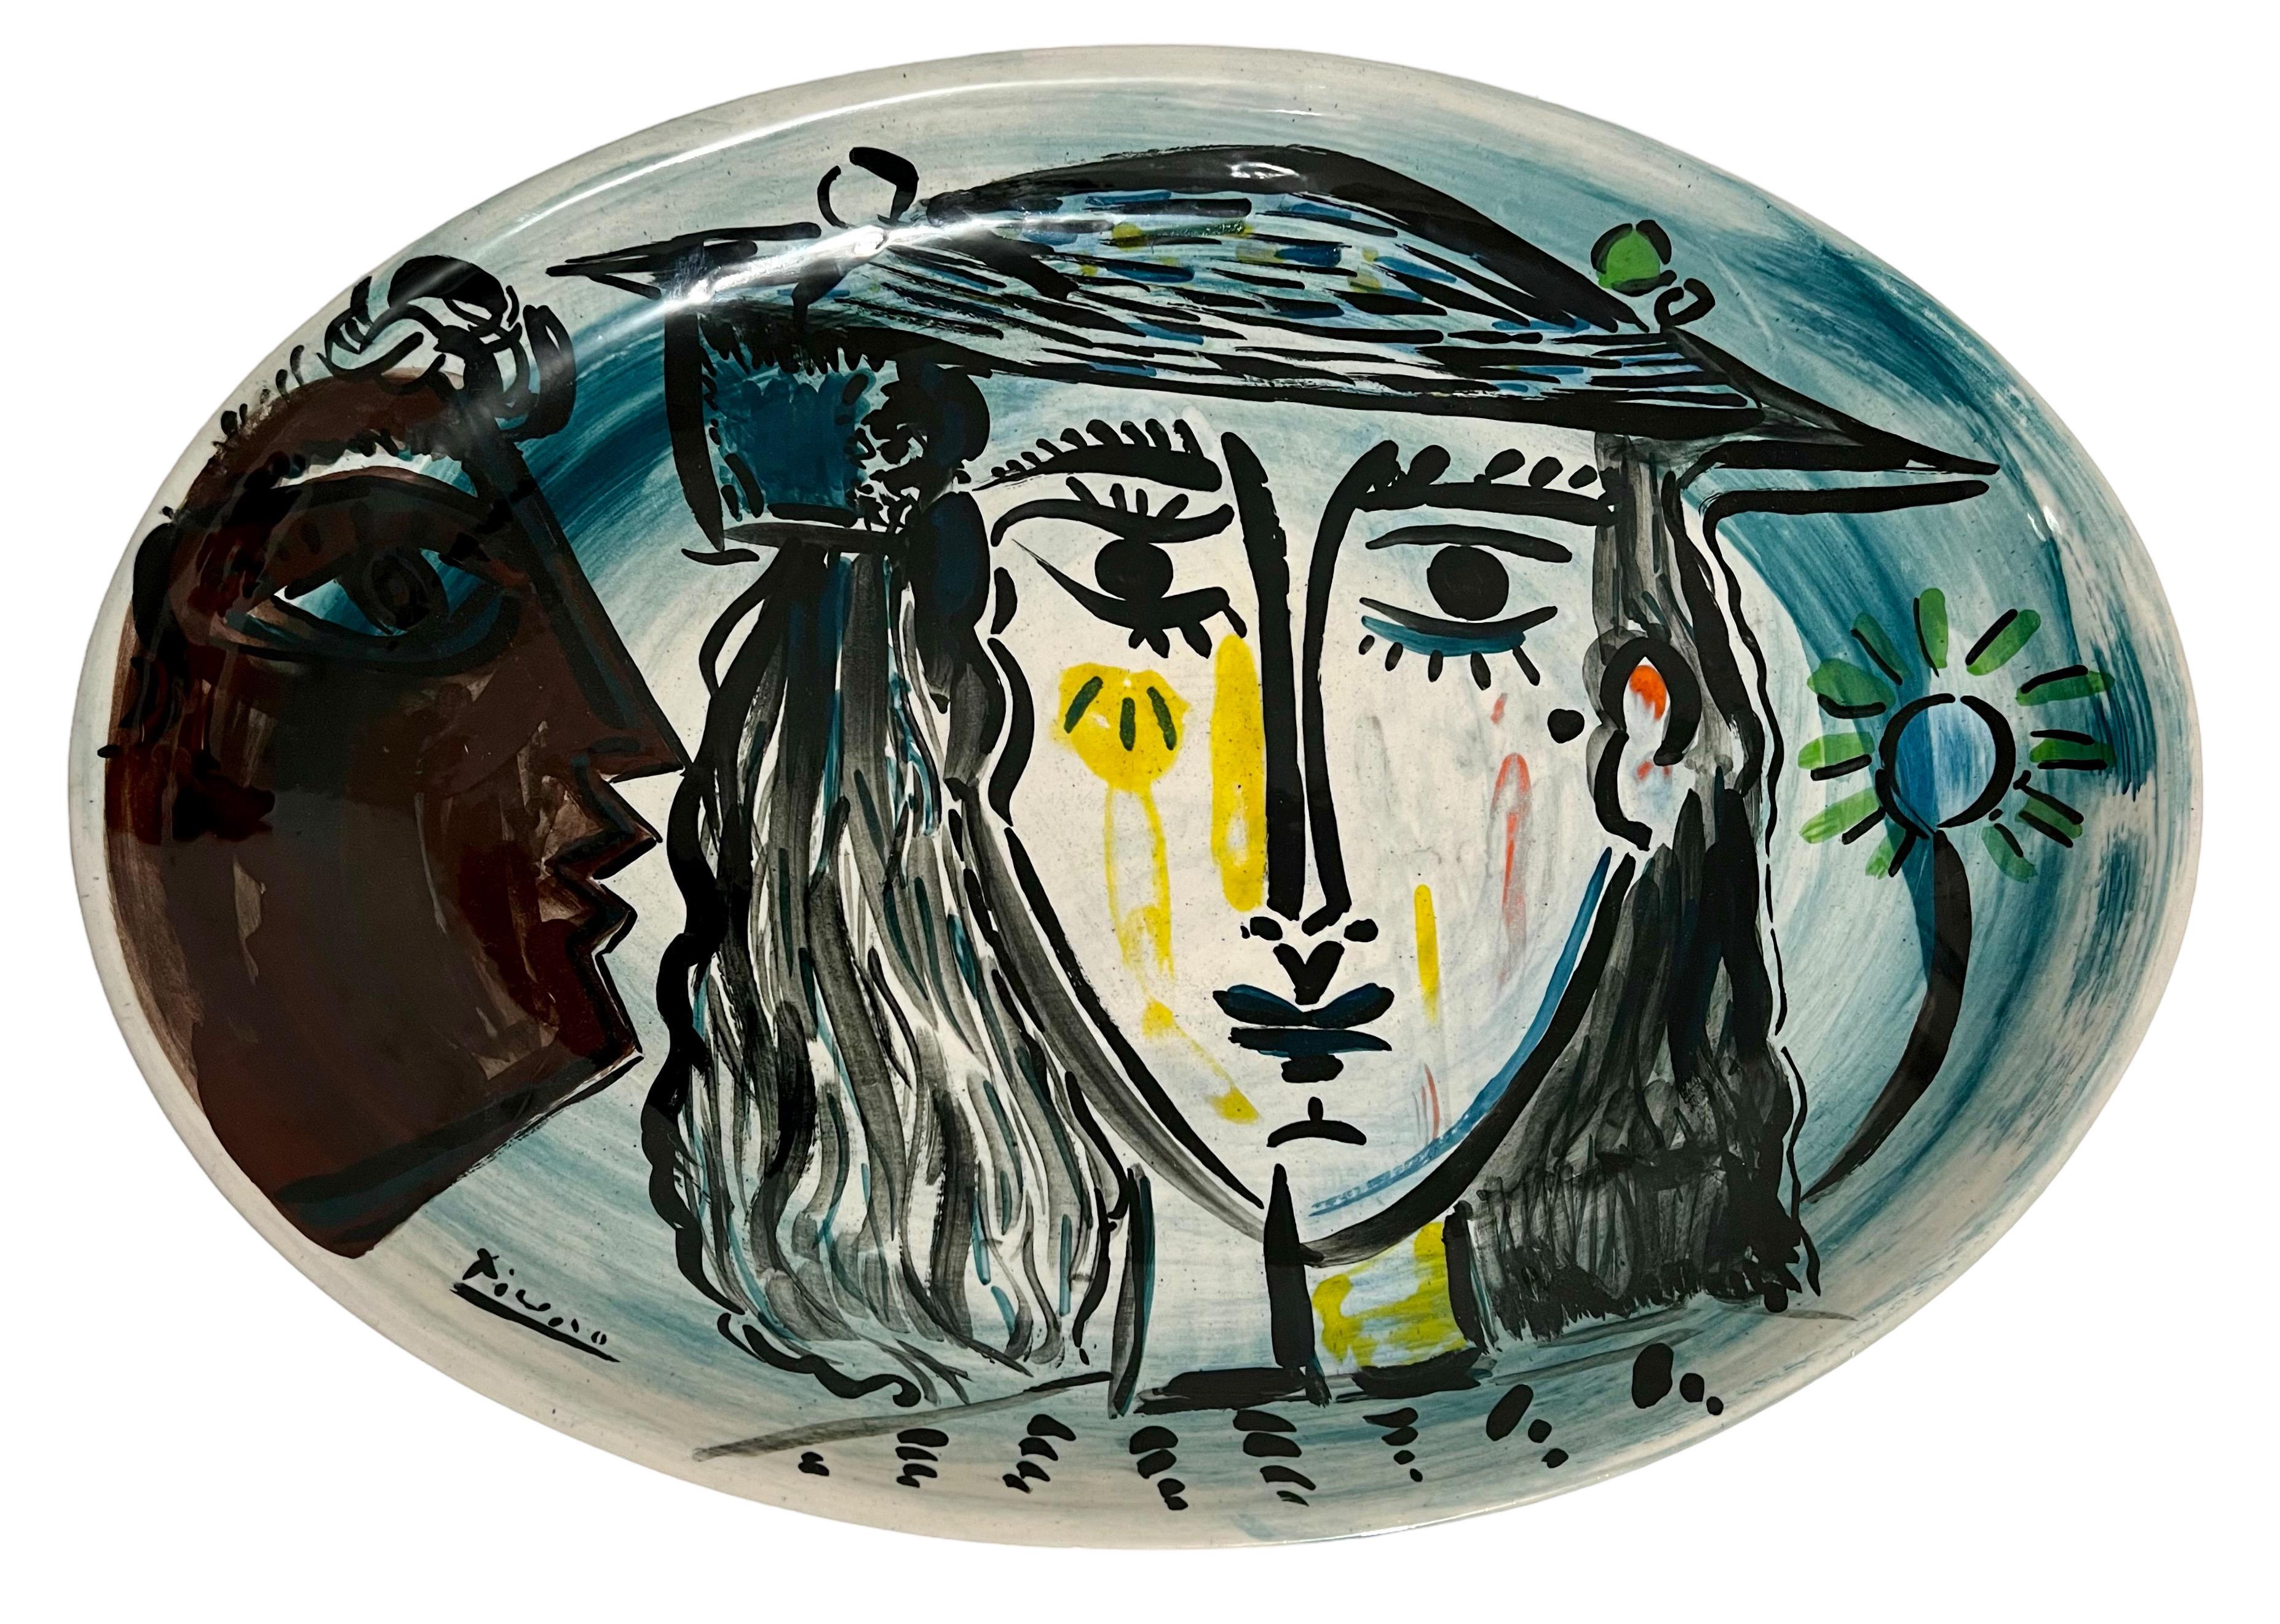 Ceramic Plate by Master Art Forger David Stein after Pablo Picasso Vallauris 